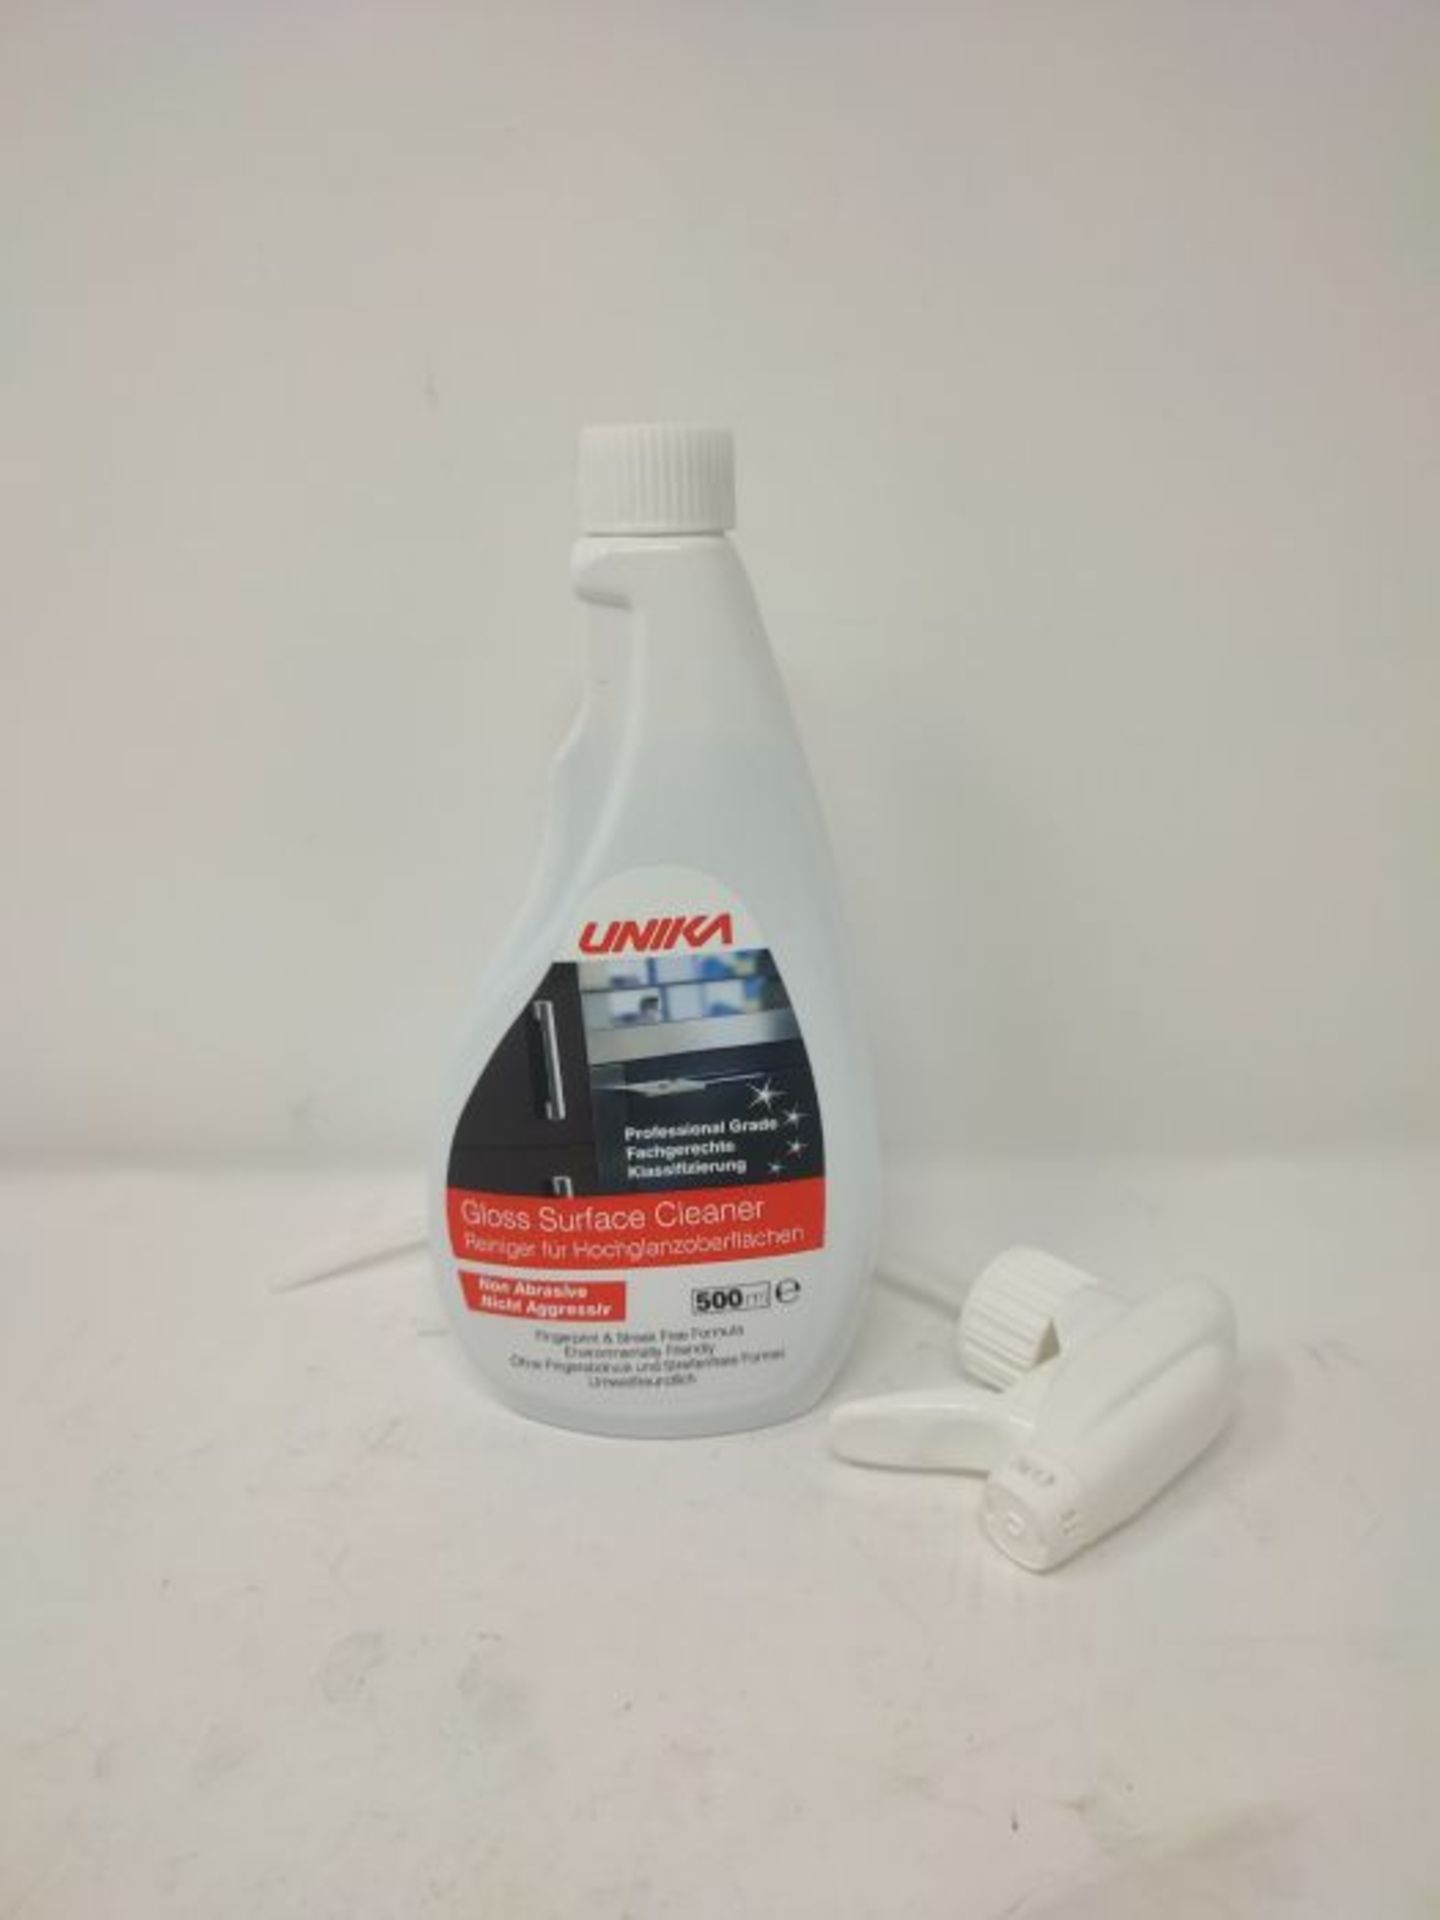 Unika CLEANGLOSSP500 Non-Aerosol Gloss Surface Cleaner & Microfibre Cloth 500ml - Image 4 of 4